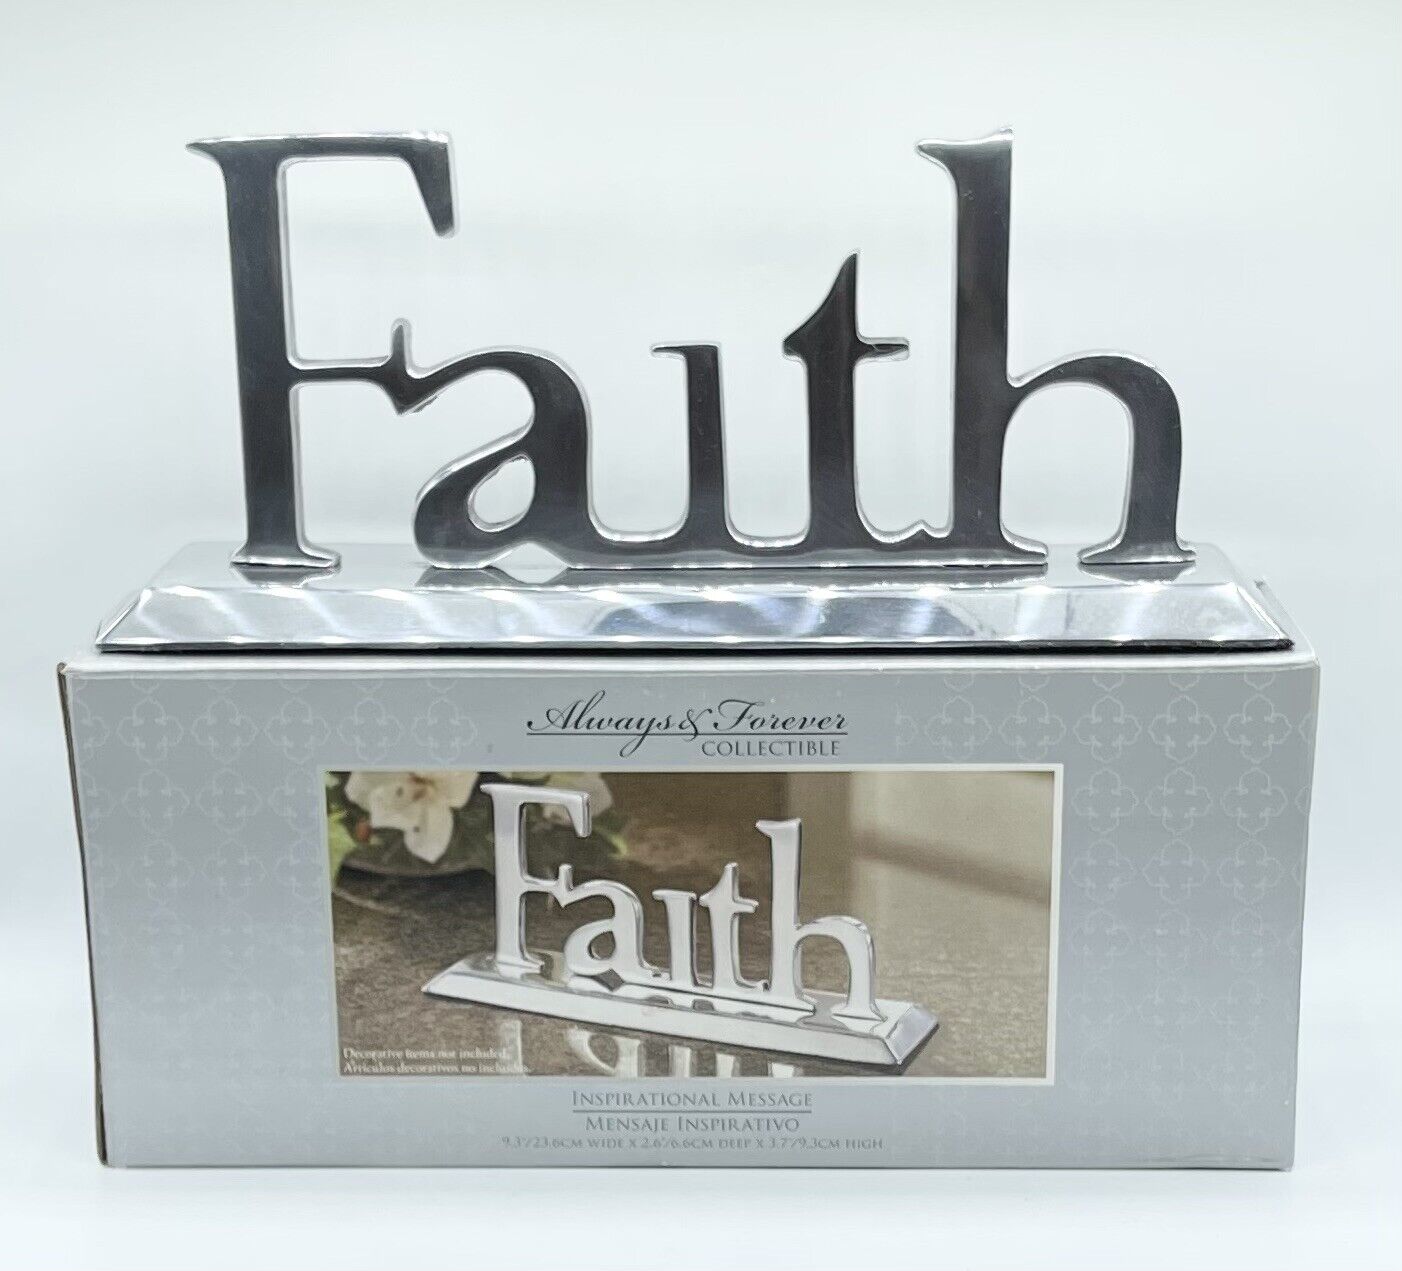 Always & Forever Collectible FAITH Inspirational Message Stand Decoration 9.3”